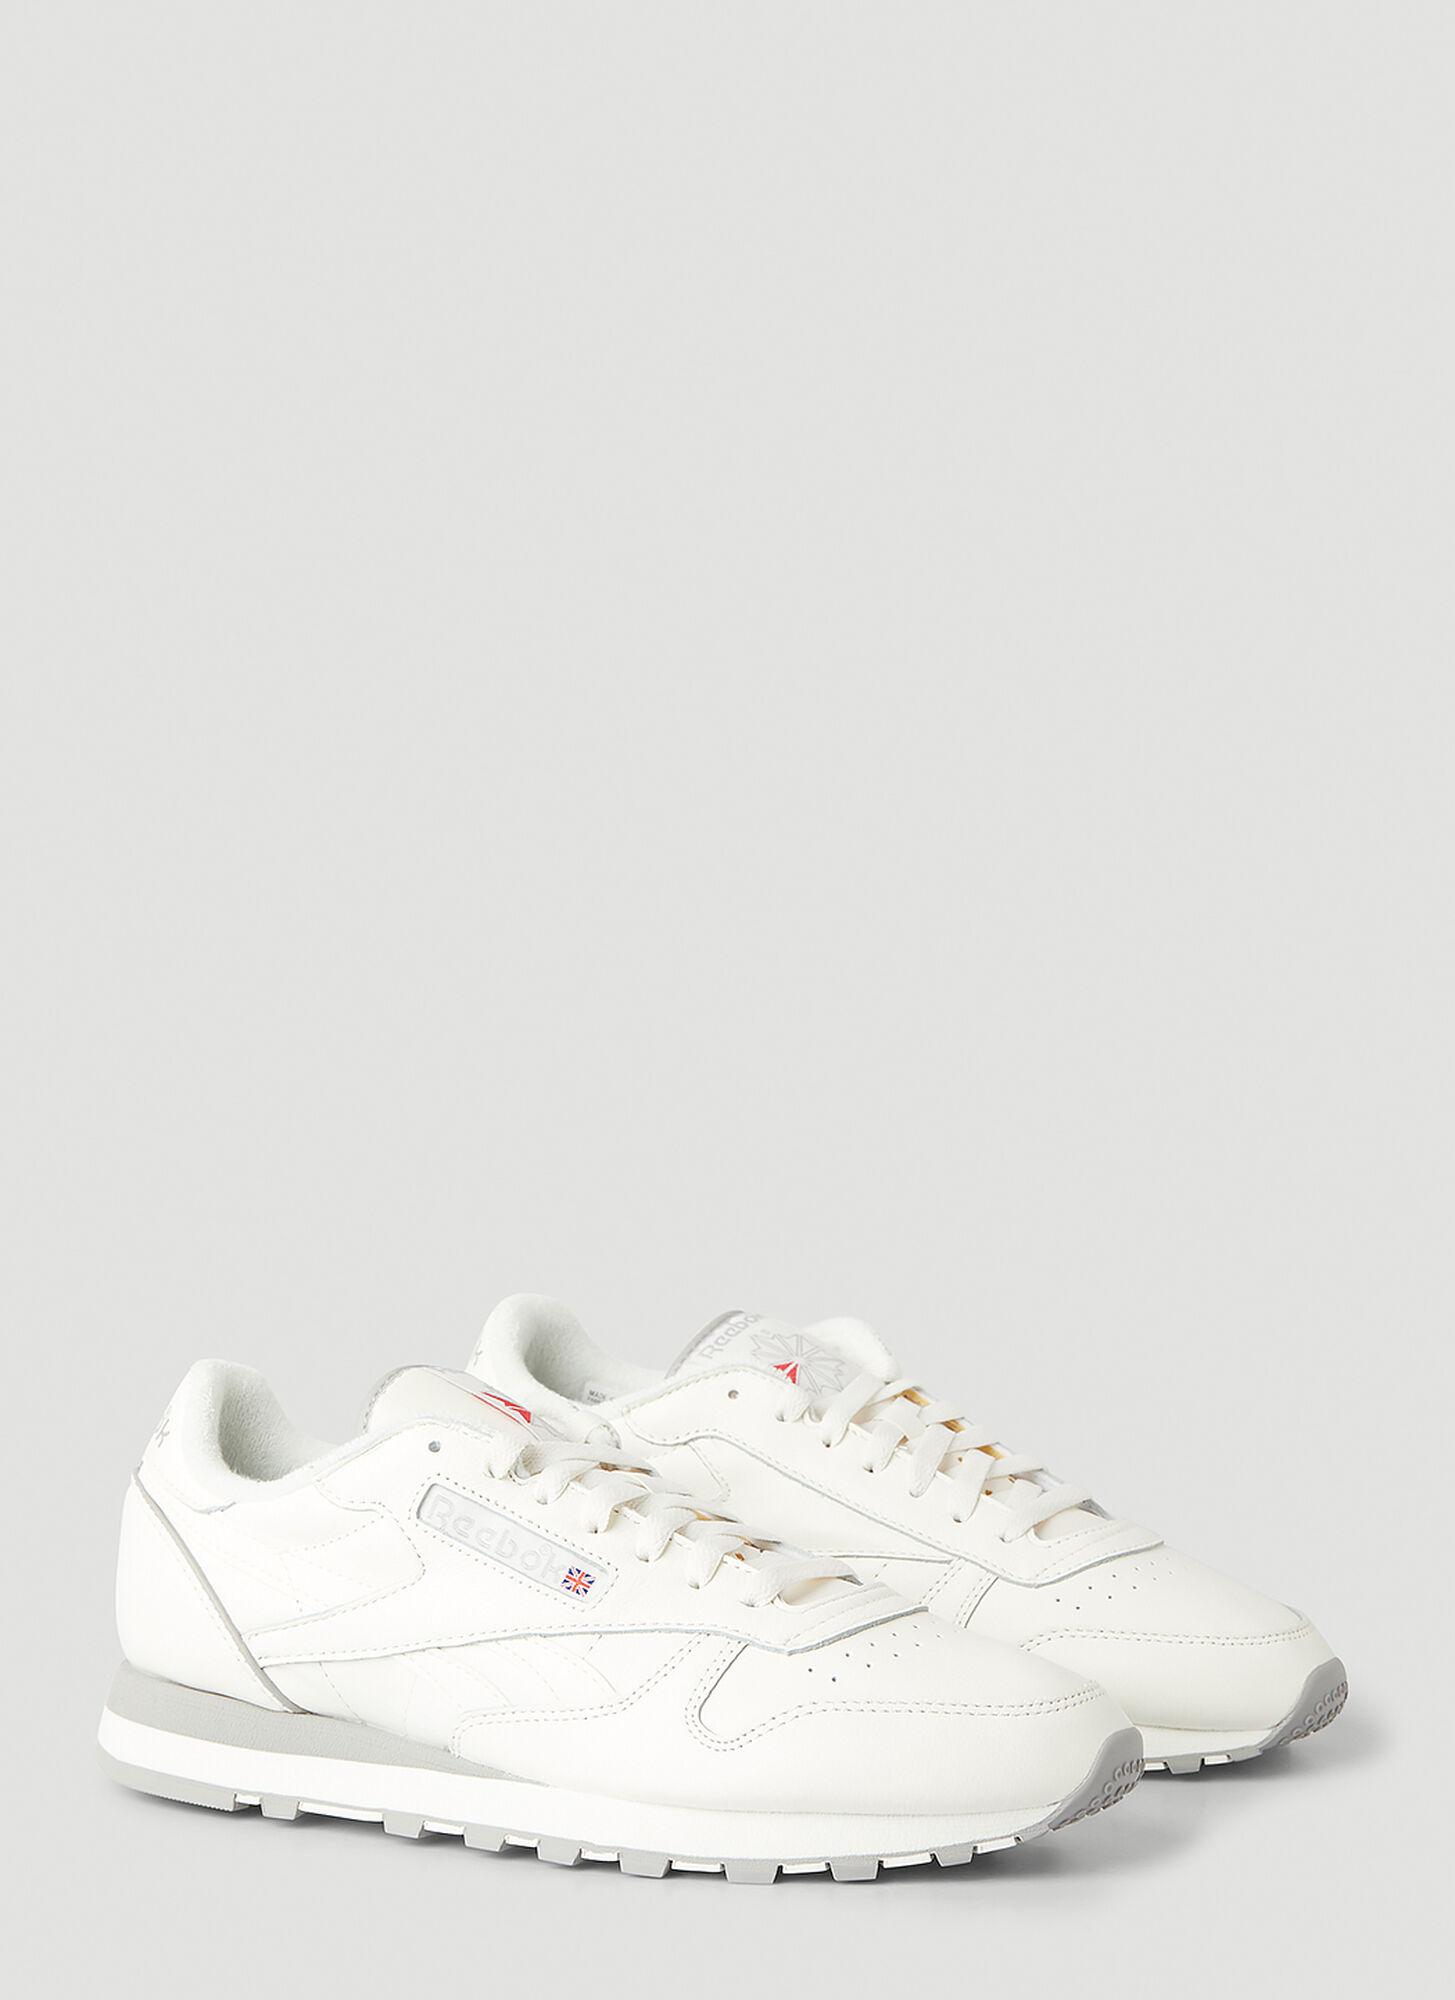 Reebok Classic Leather 1983 Vintage Sneakers in White for Men | Lyst